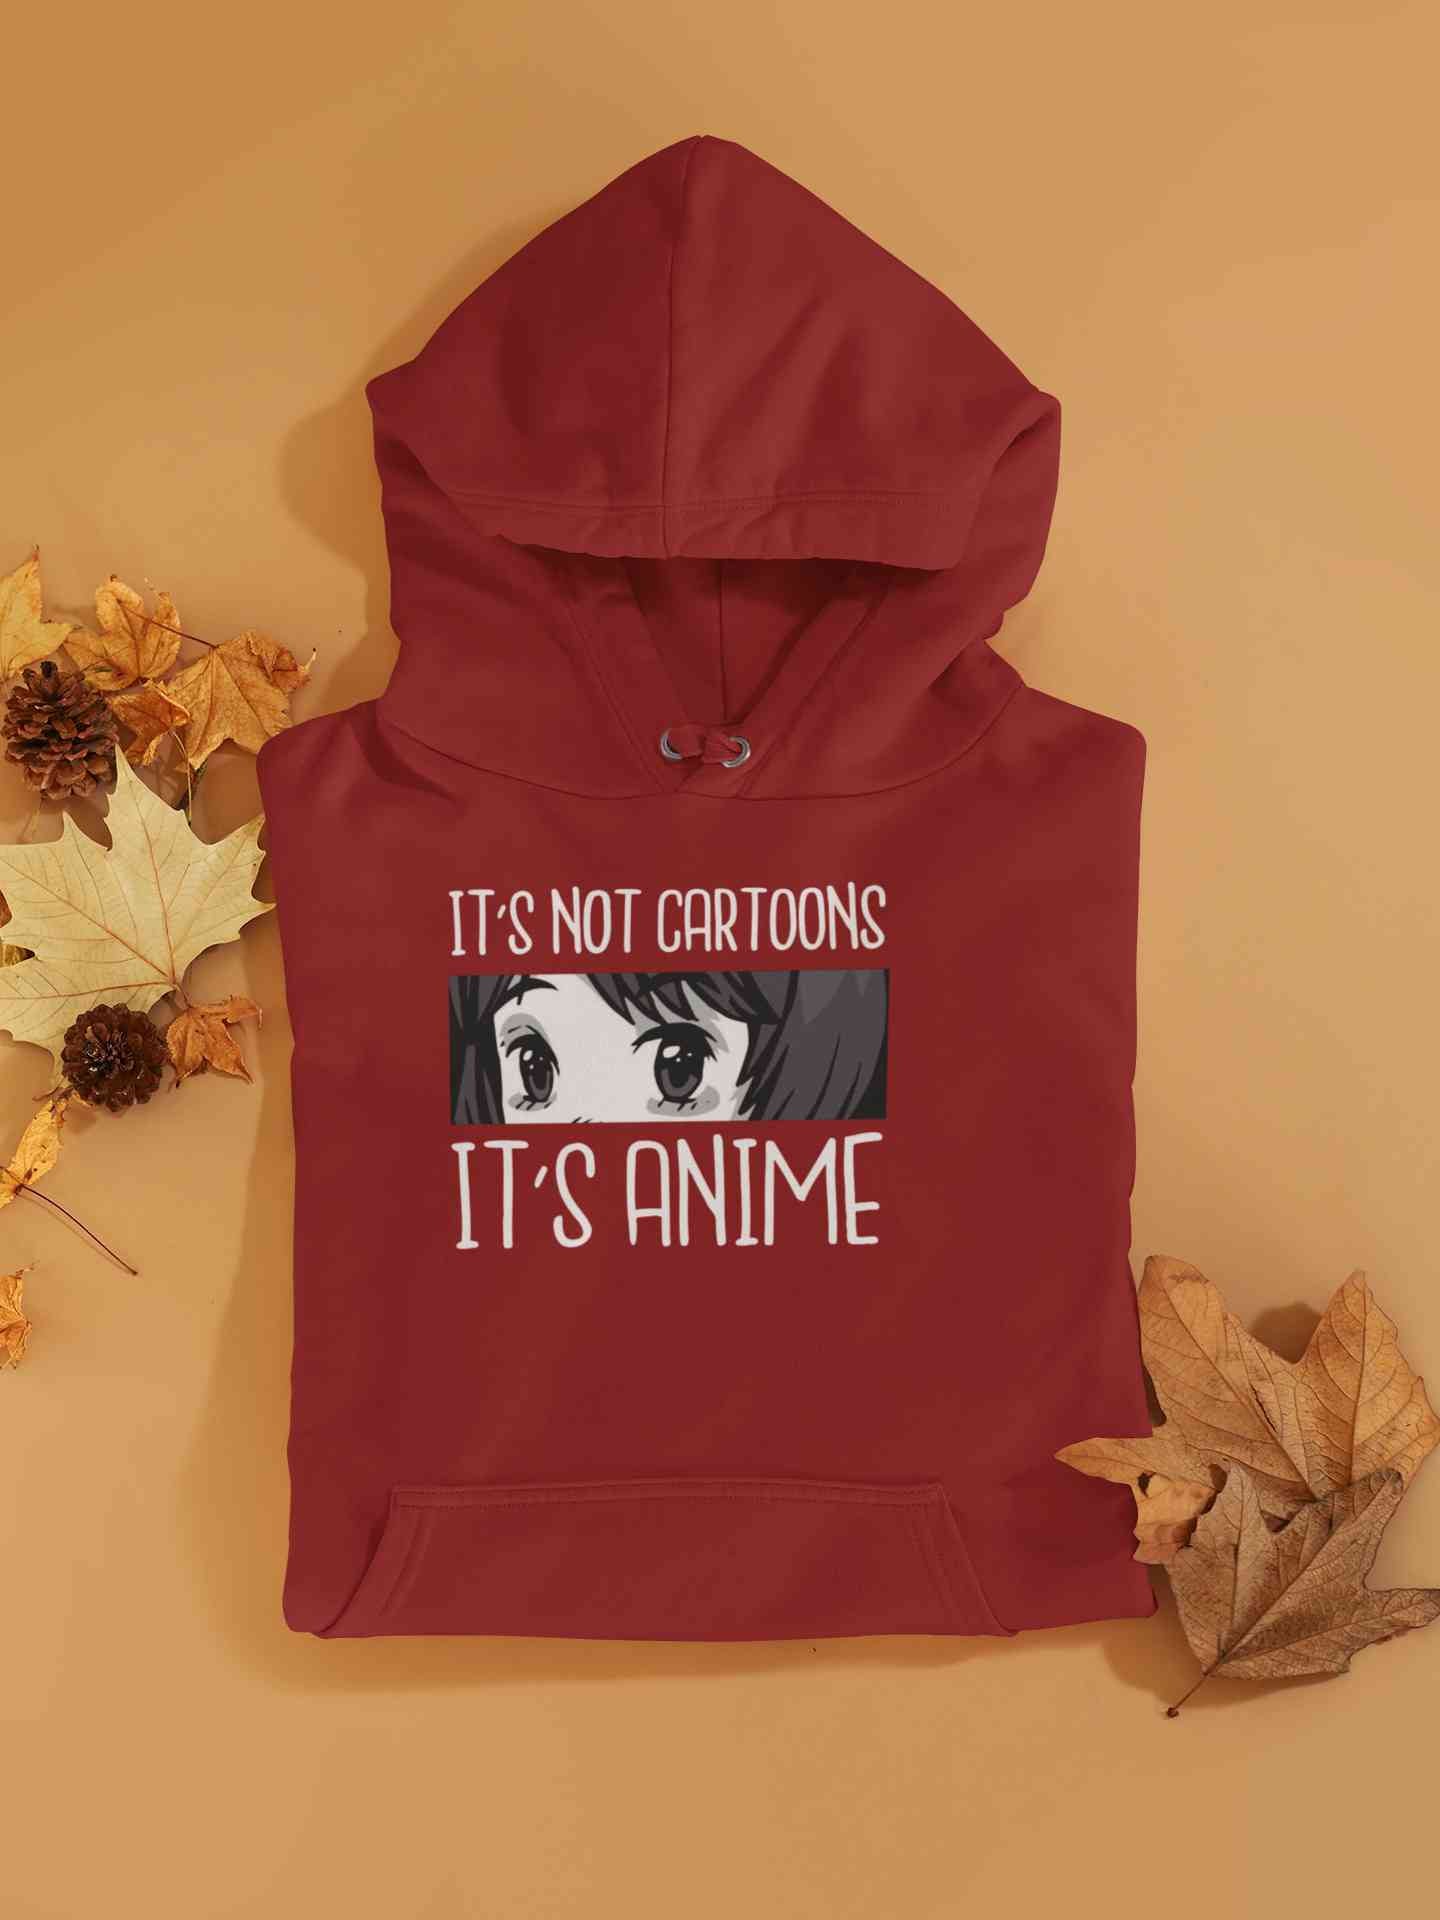 Anime Hoodie Large All Over Face Print Pull Over Long Sleeve Pocket | eBay